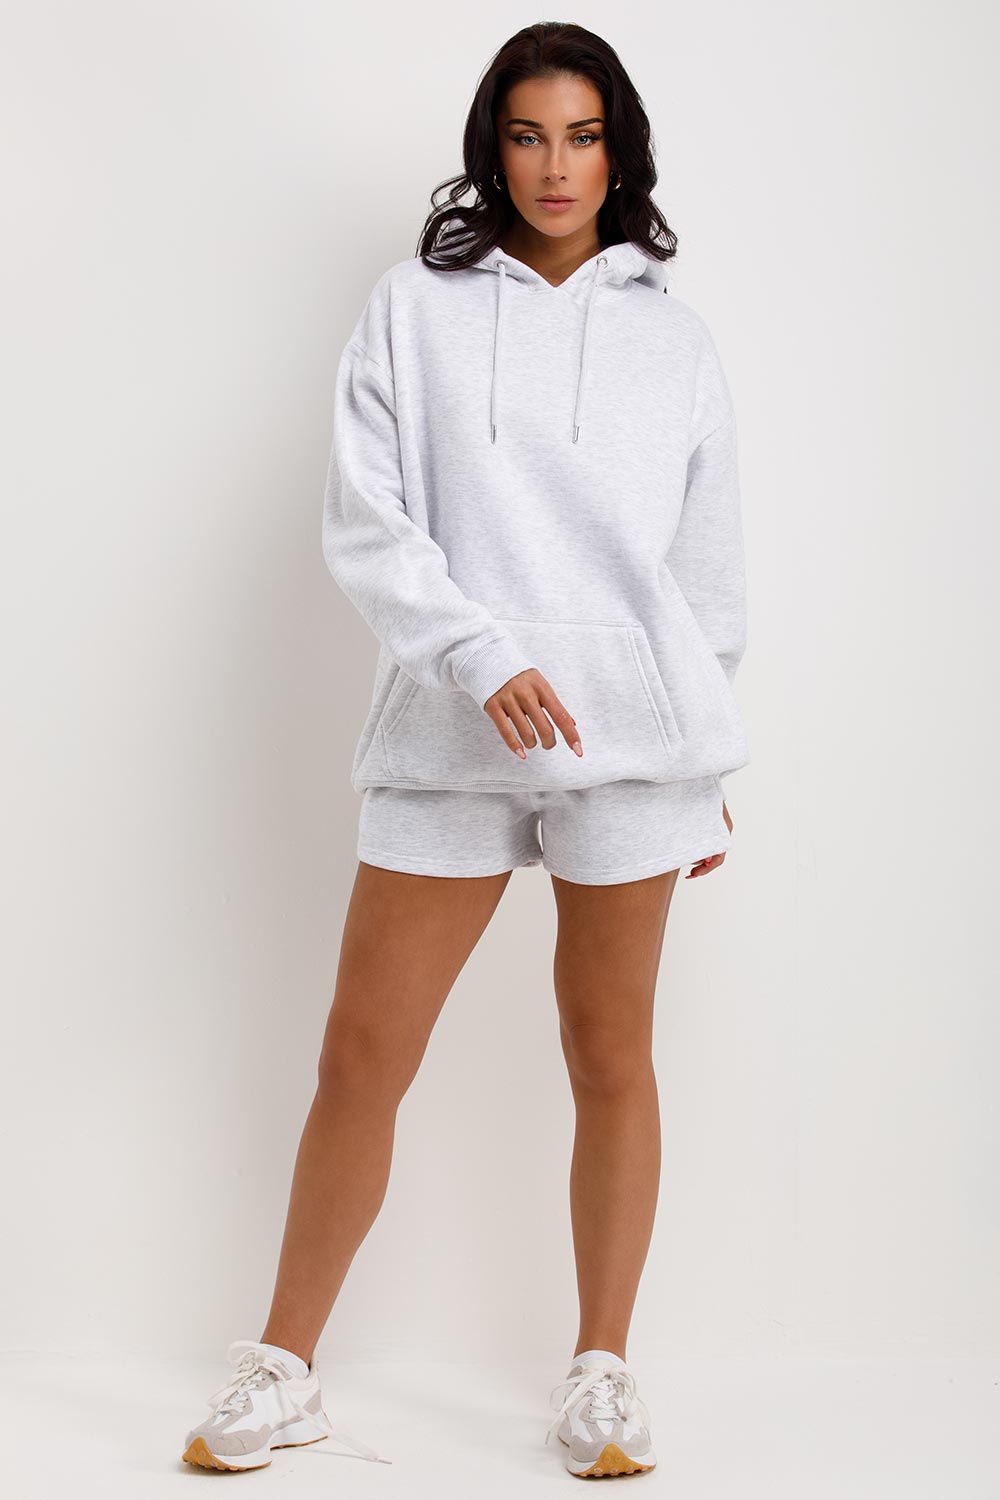 shorts and hoodie tracksuit womens summer loungewear co ord set